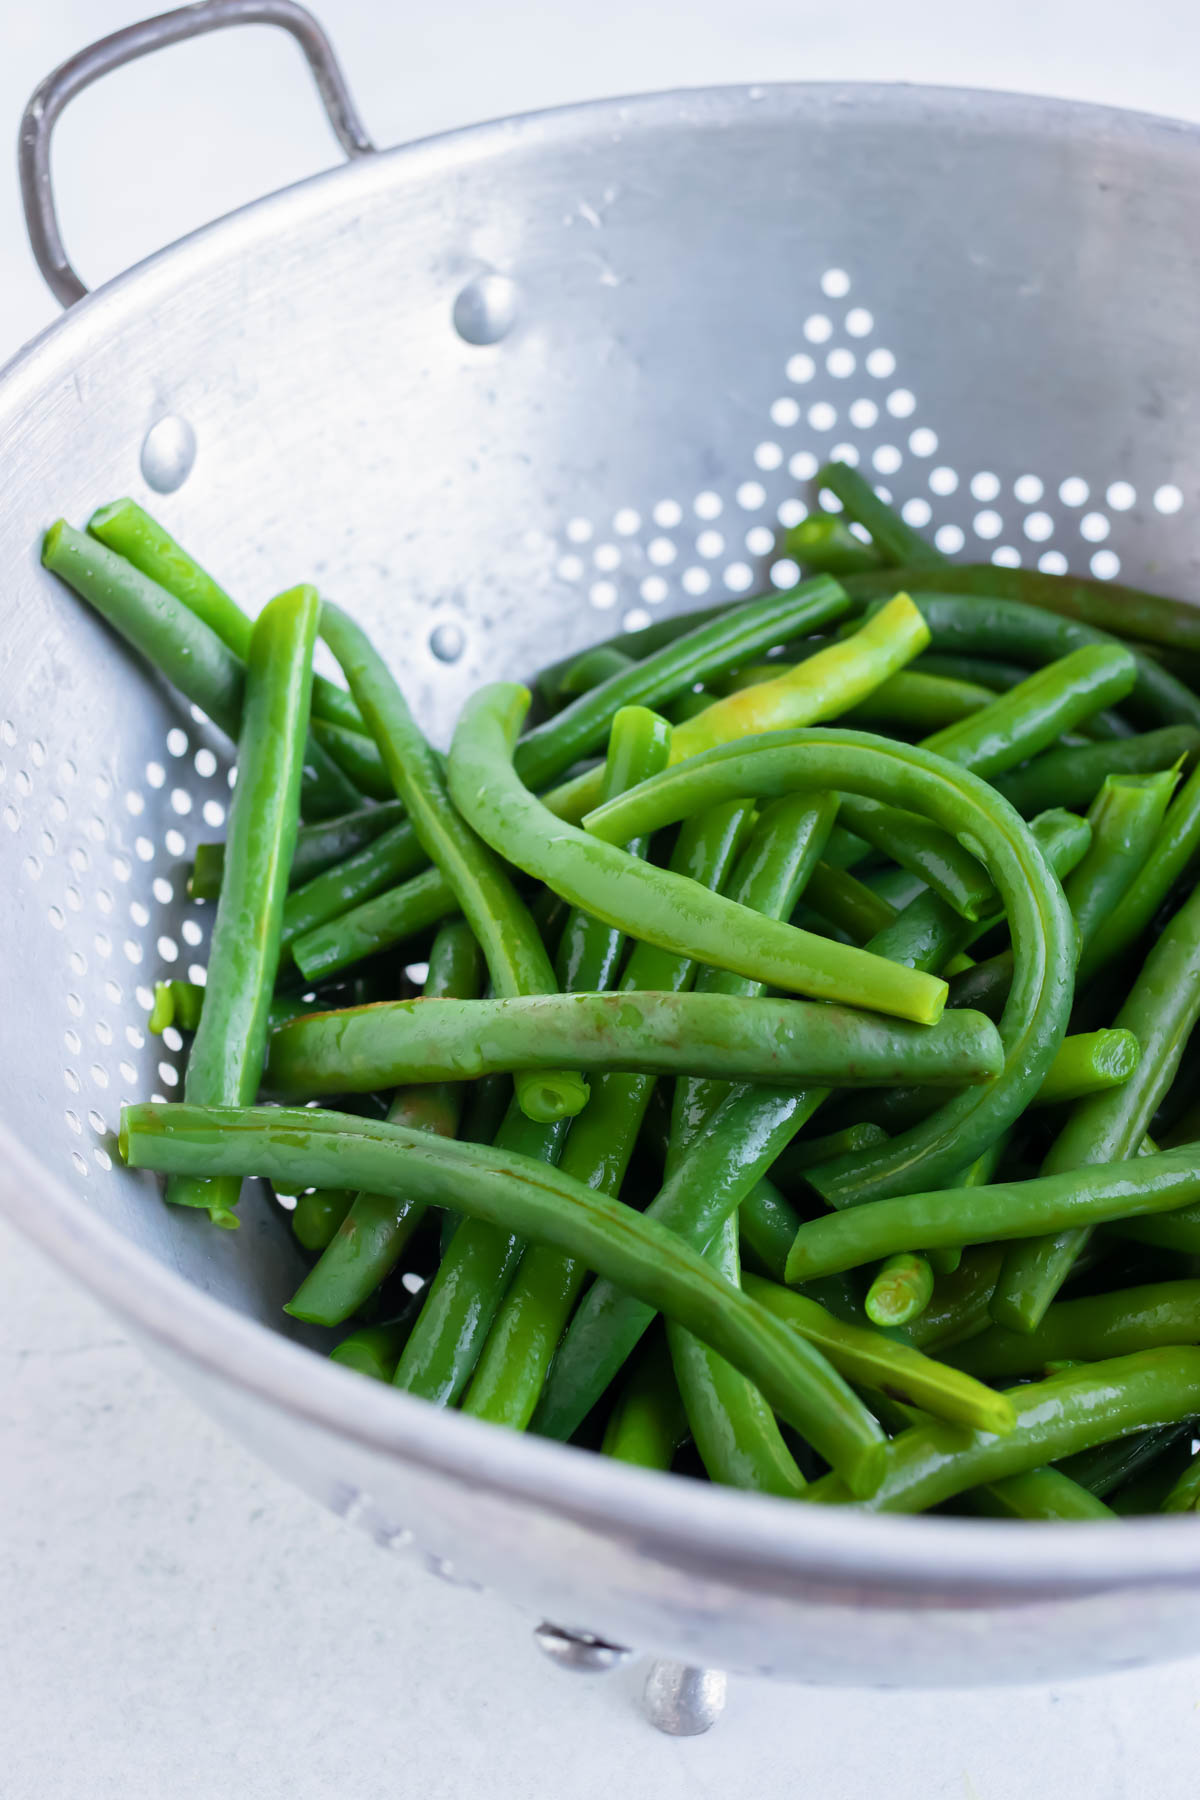 Boiled green beans being drained in a colander.